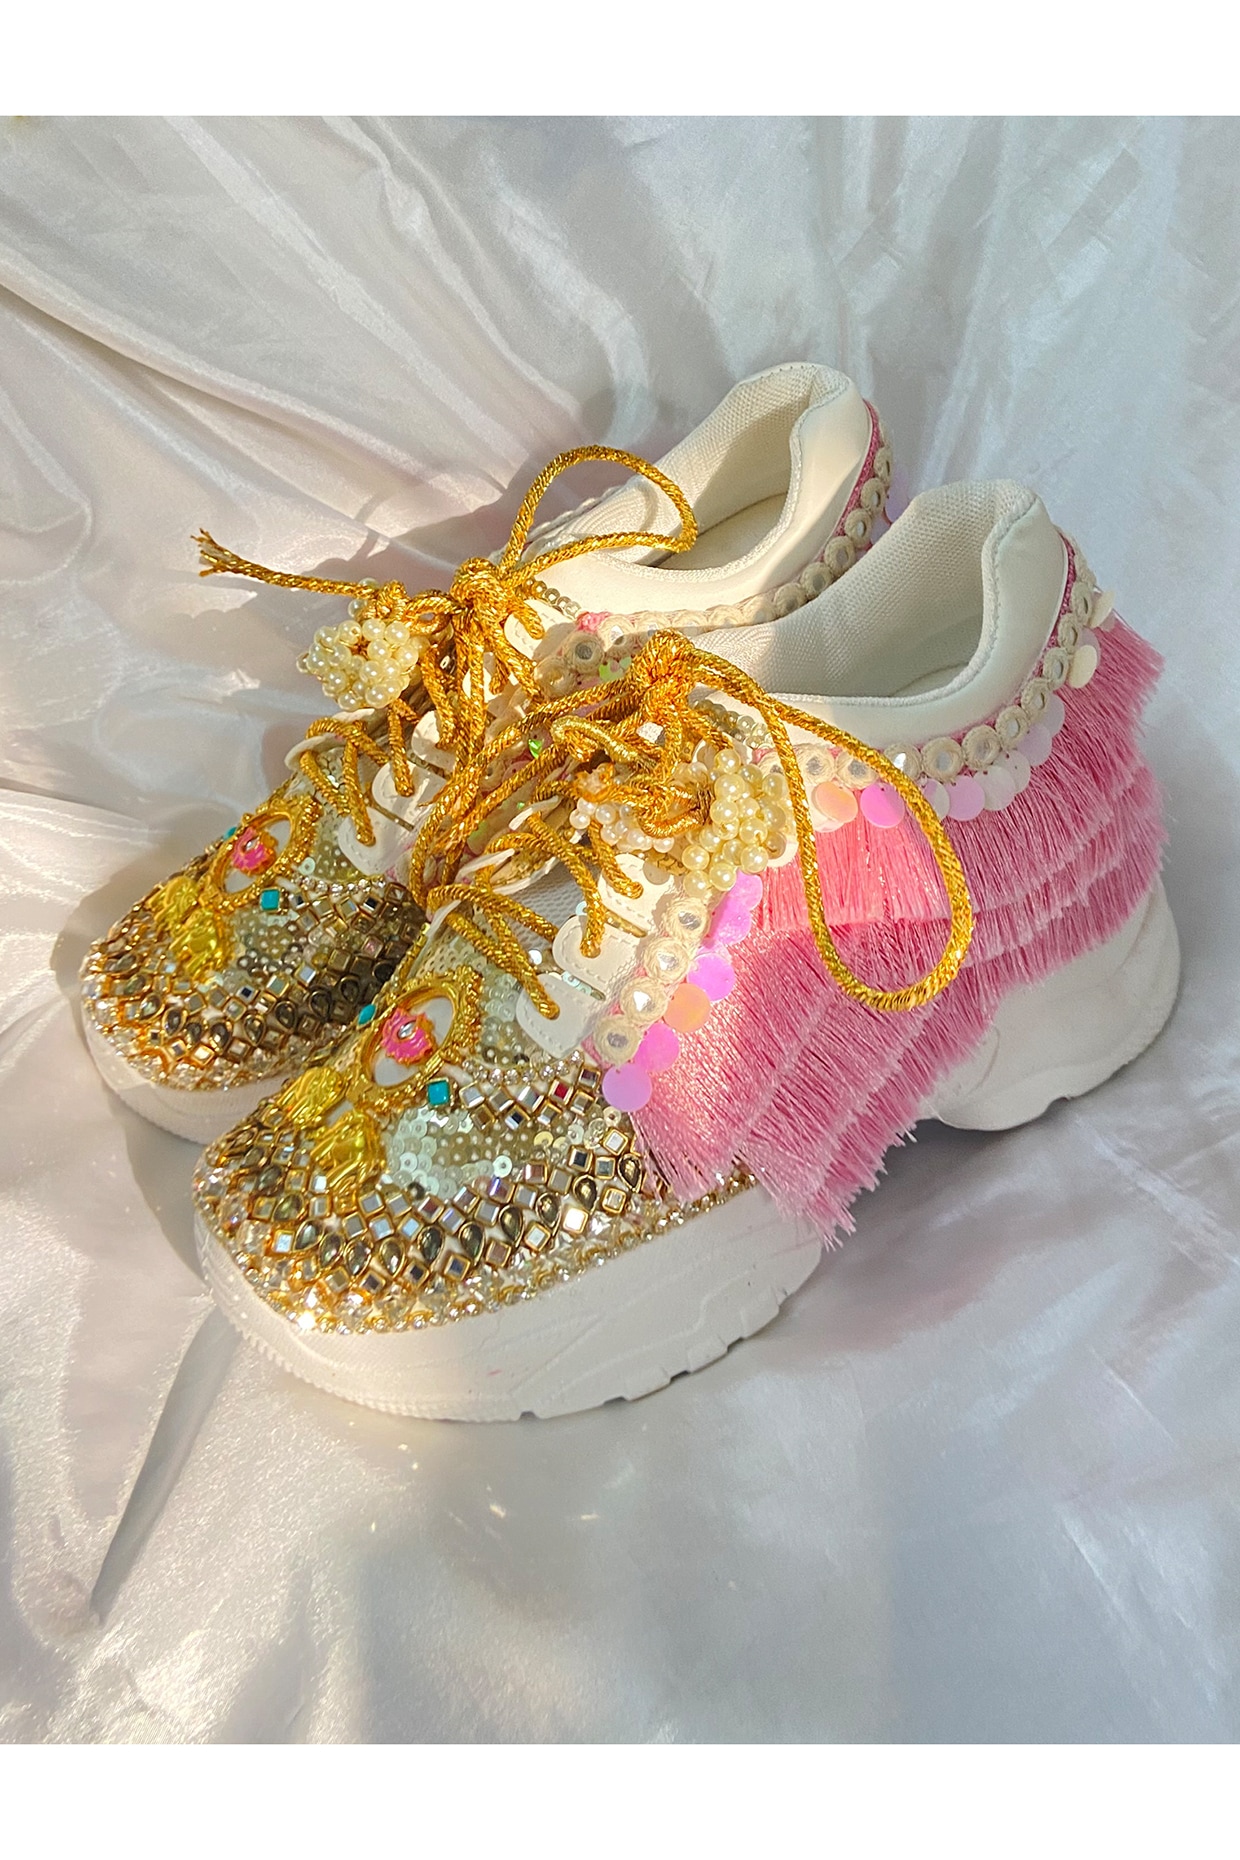 Bling💎-Custom👠Shoes 👟Sneakers (@taylorspennysblingcustoms) • Instagram  photos and videos